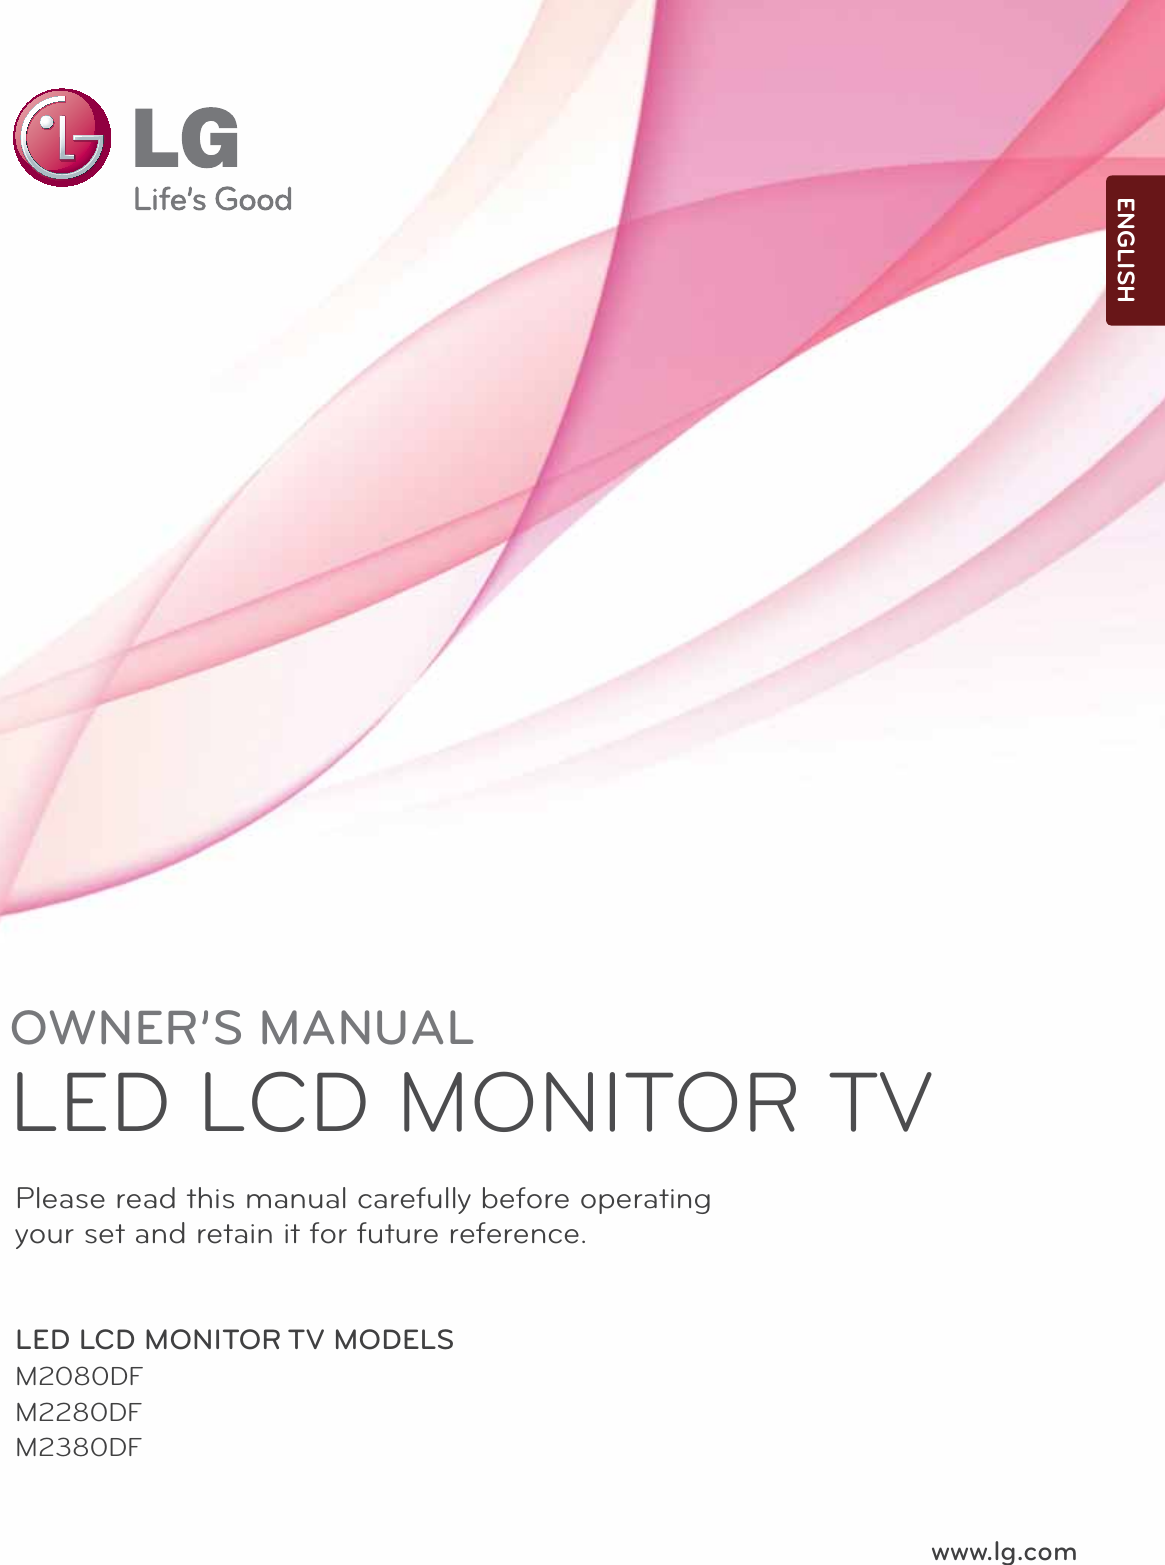 www.lg.comOWNER’S MANUALLED LCD MONITOR TVLED LCD MONITOR TV MODELSM2080DFM2280DFM2380DFPlease read this manual carefully before operatingyour set and retain it for future reference.ENGLISH